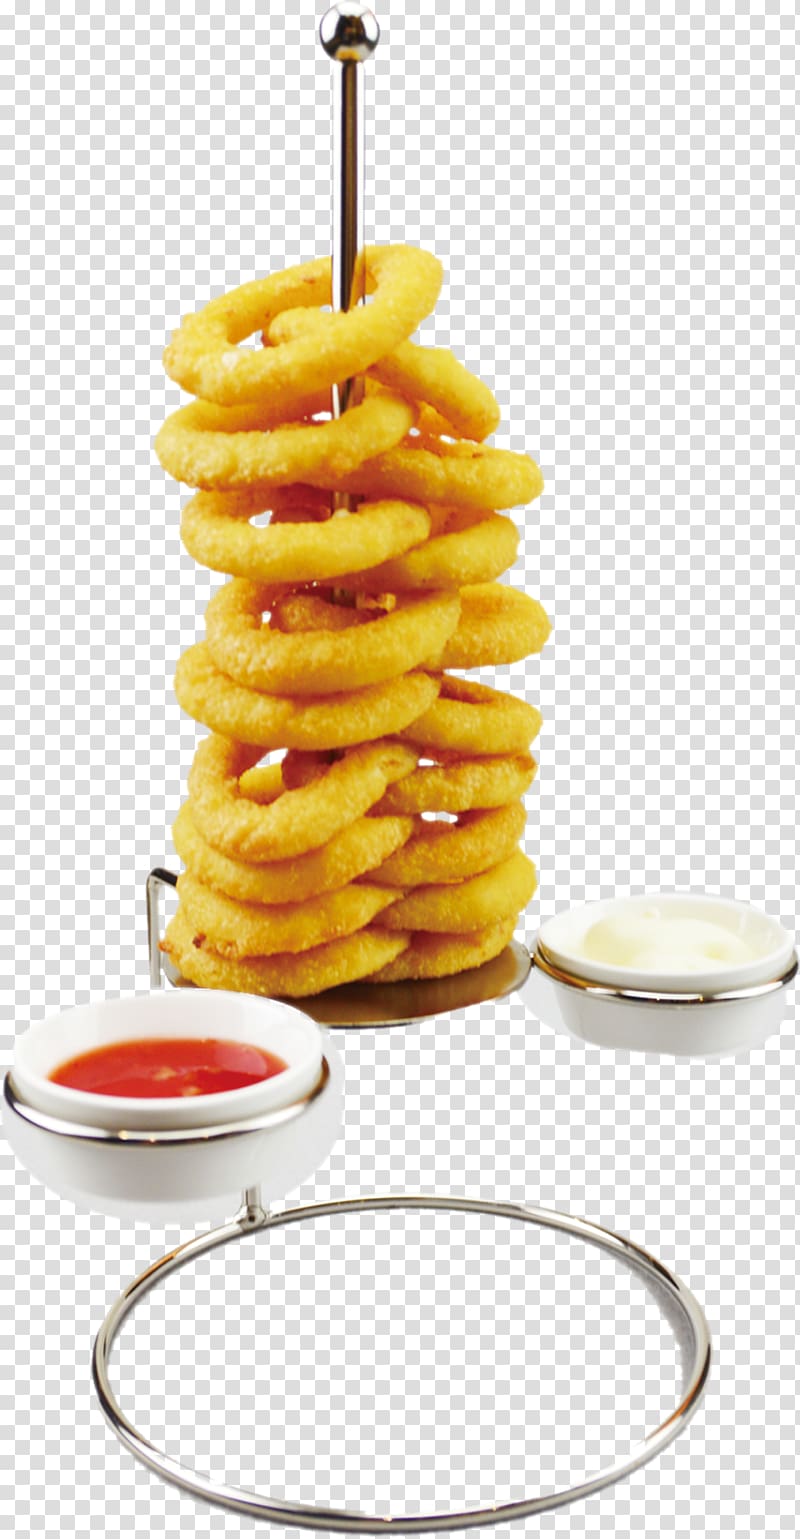 Onion ring Fast food Pancake, Western onion rings transparent background PNG clipart